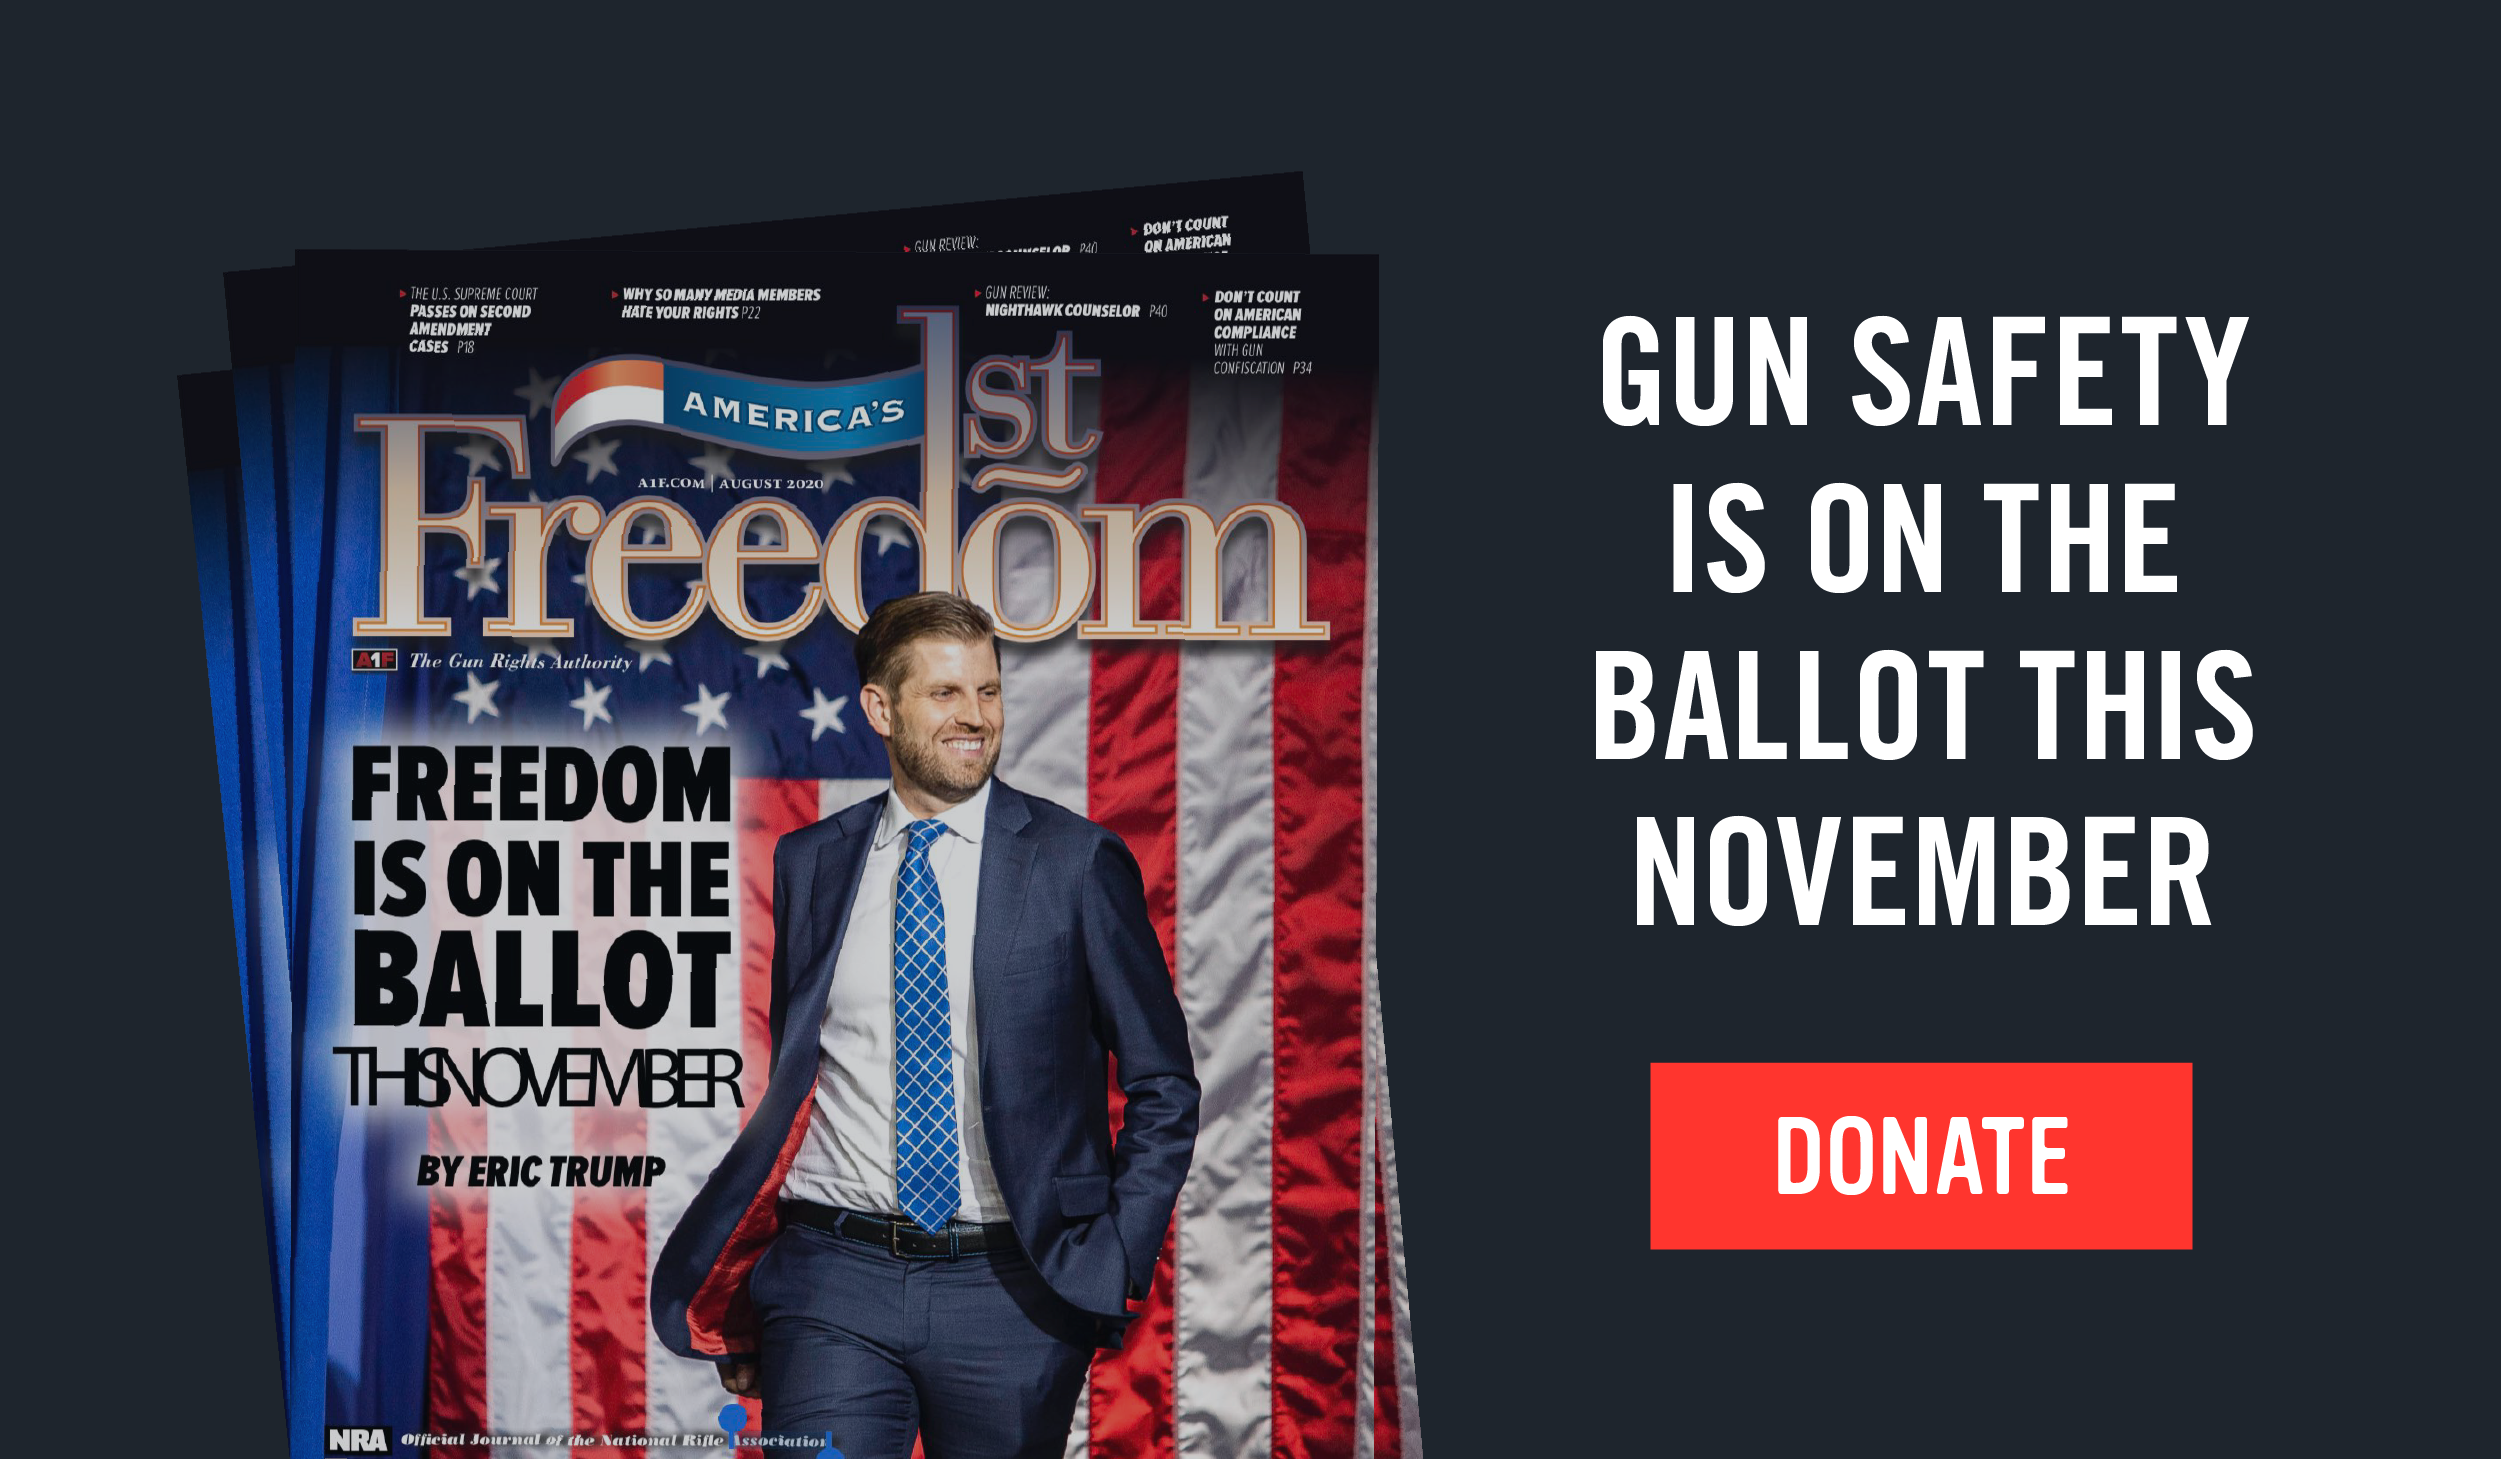 Gun Safety is on the Ballot. Donate Now.